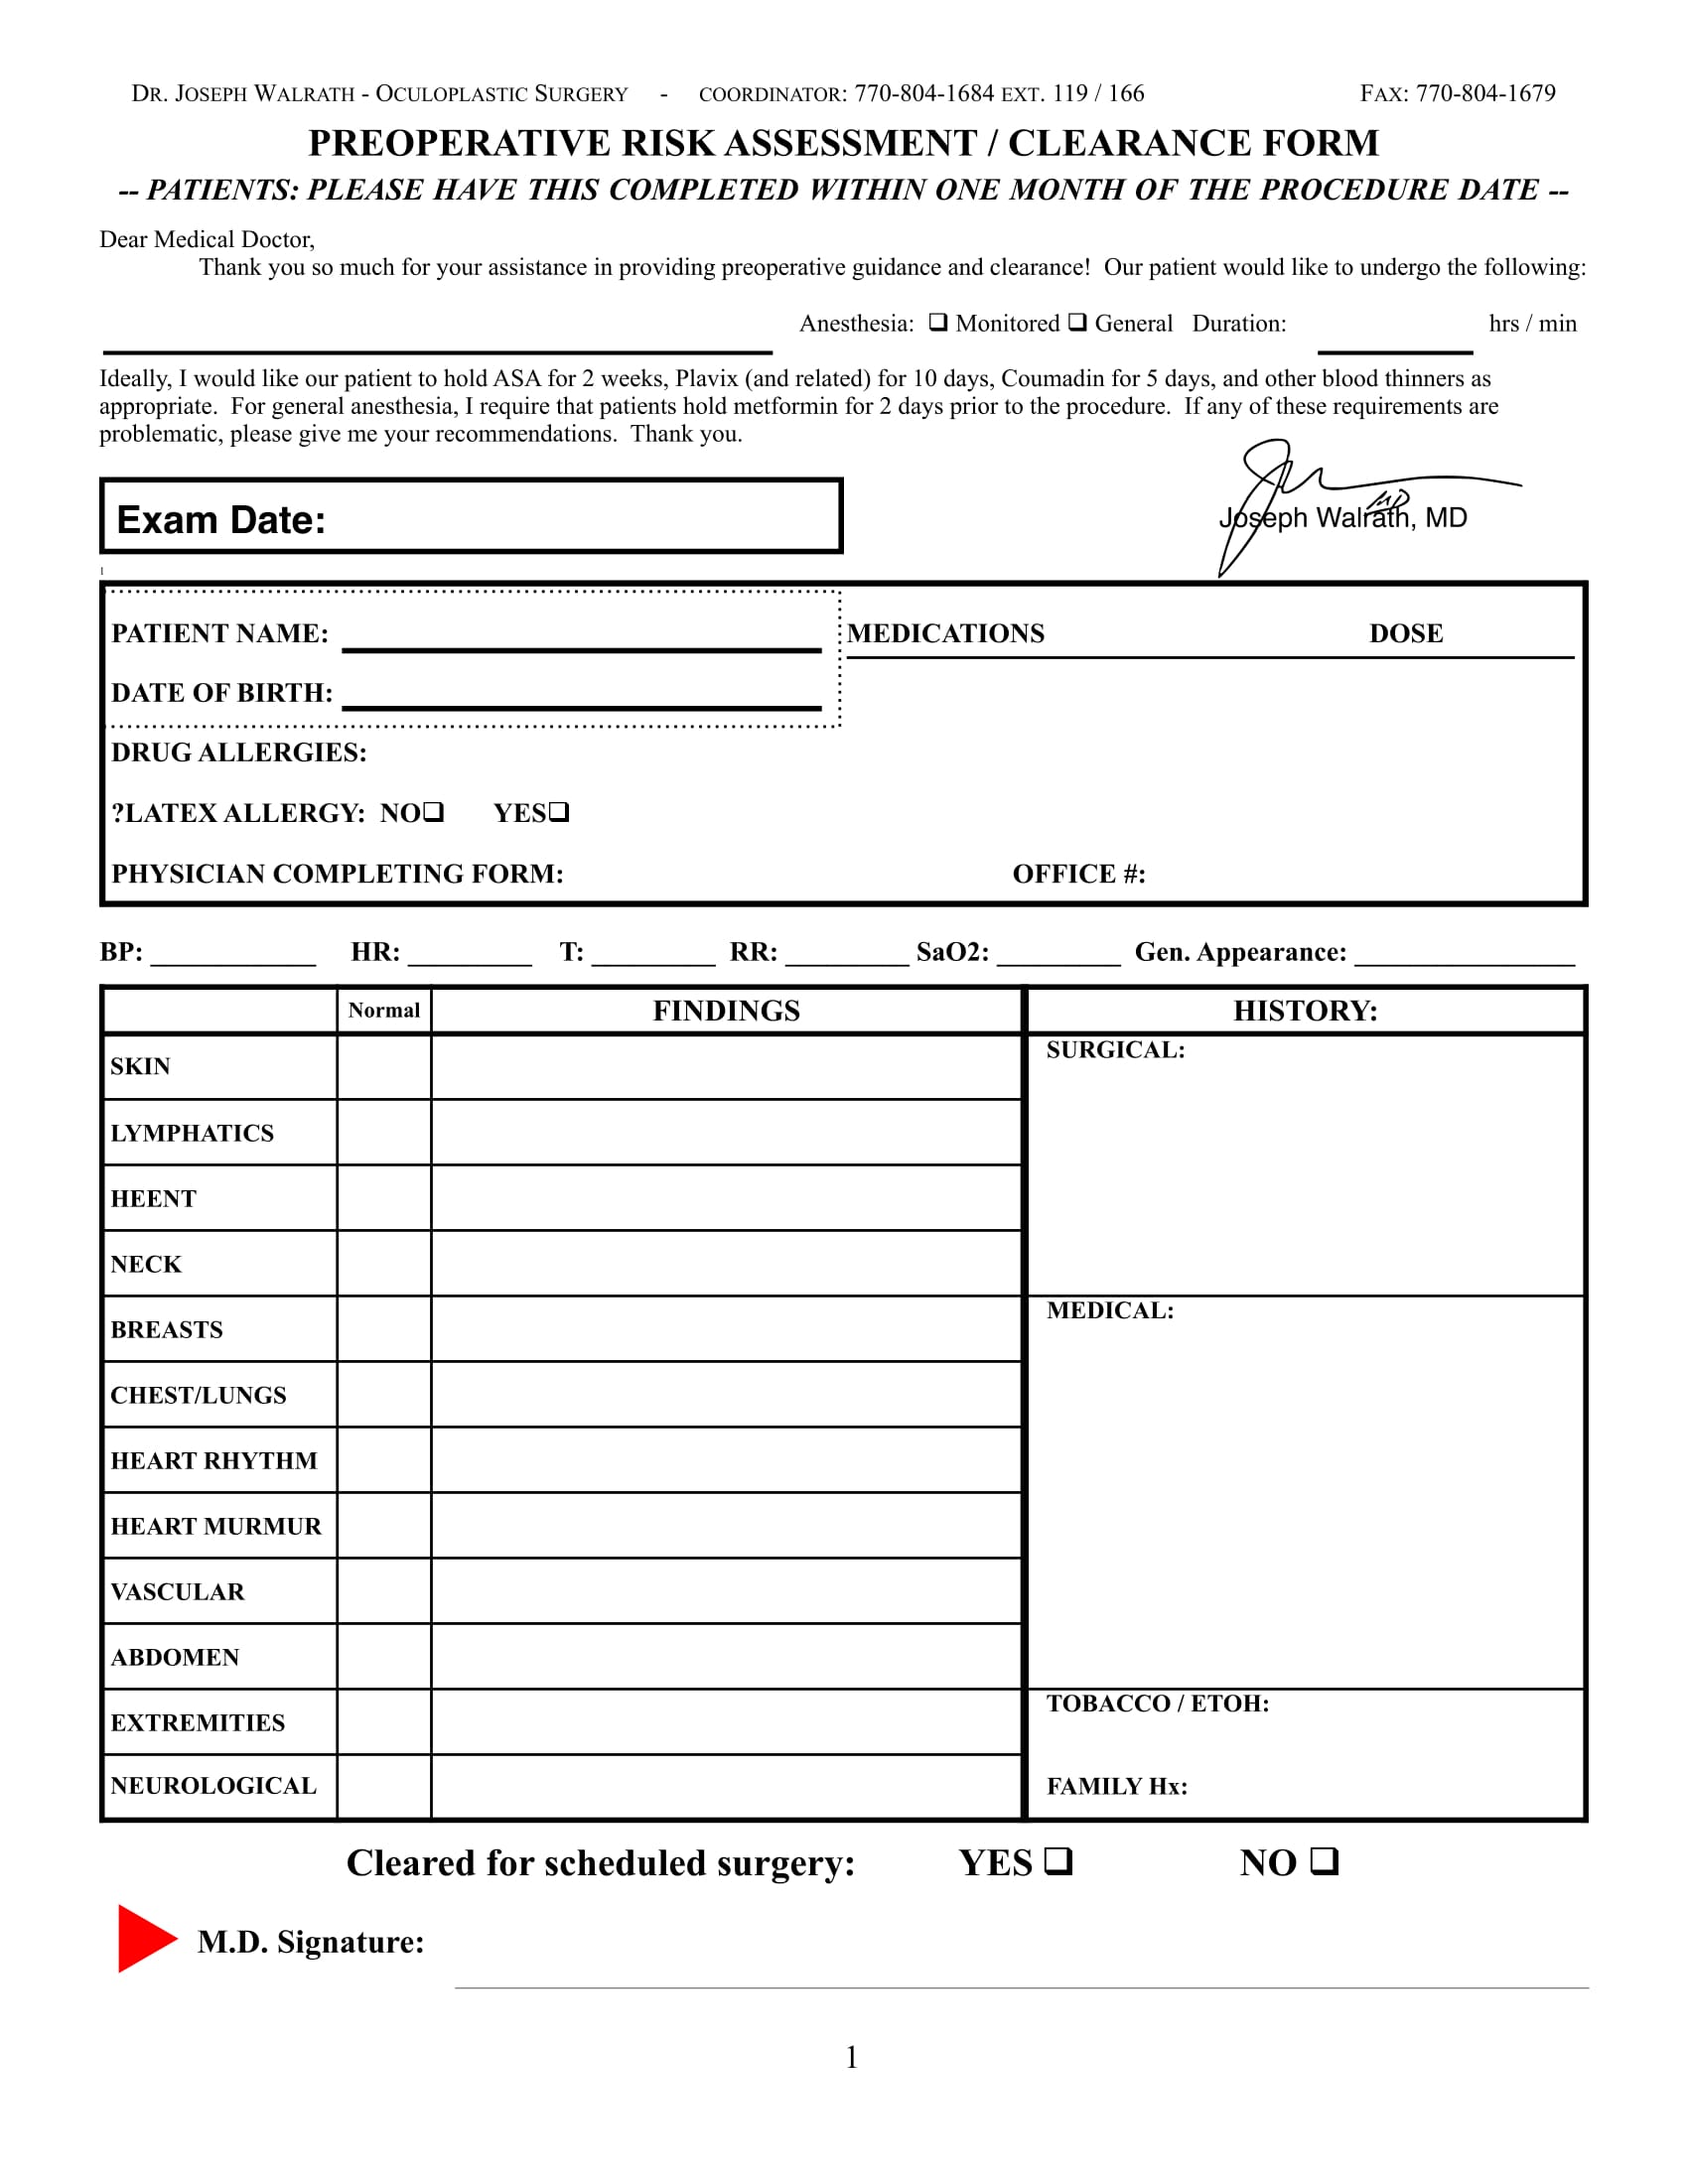 medical risk clearance form 1